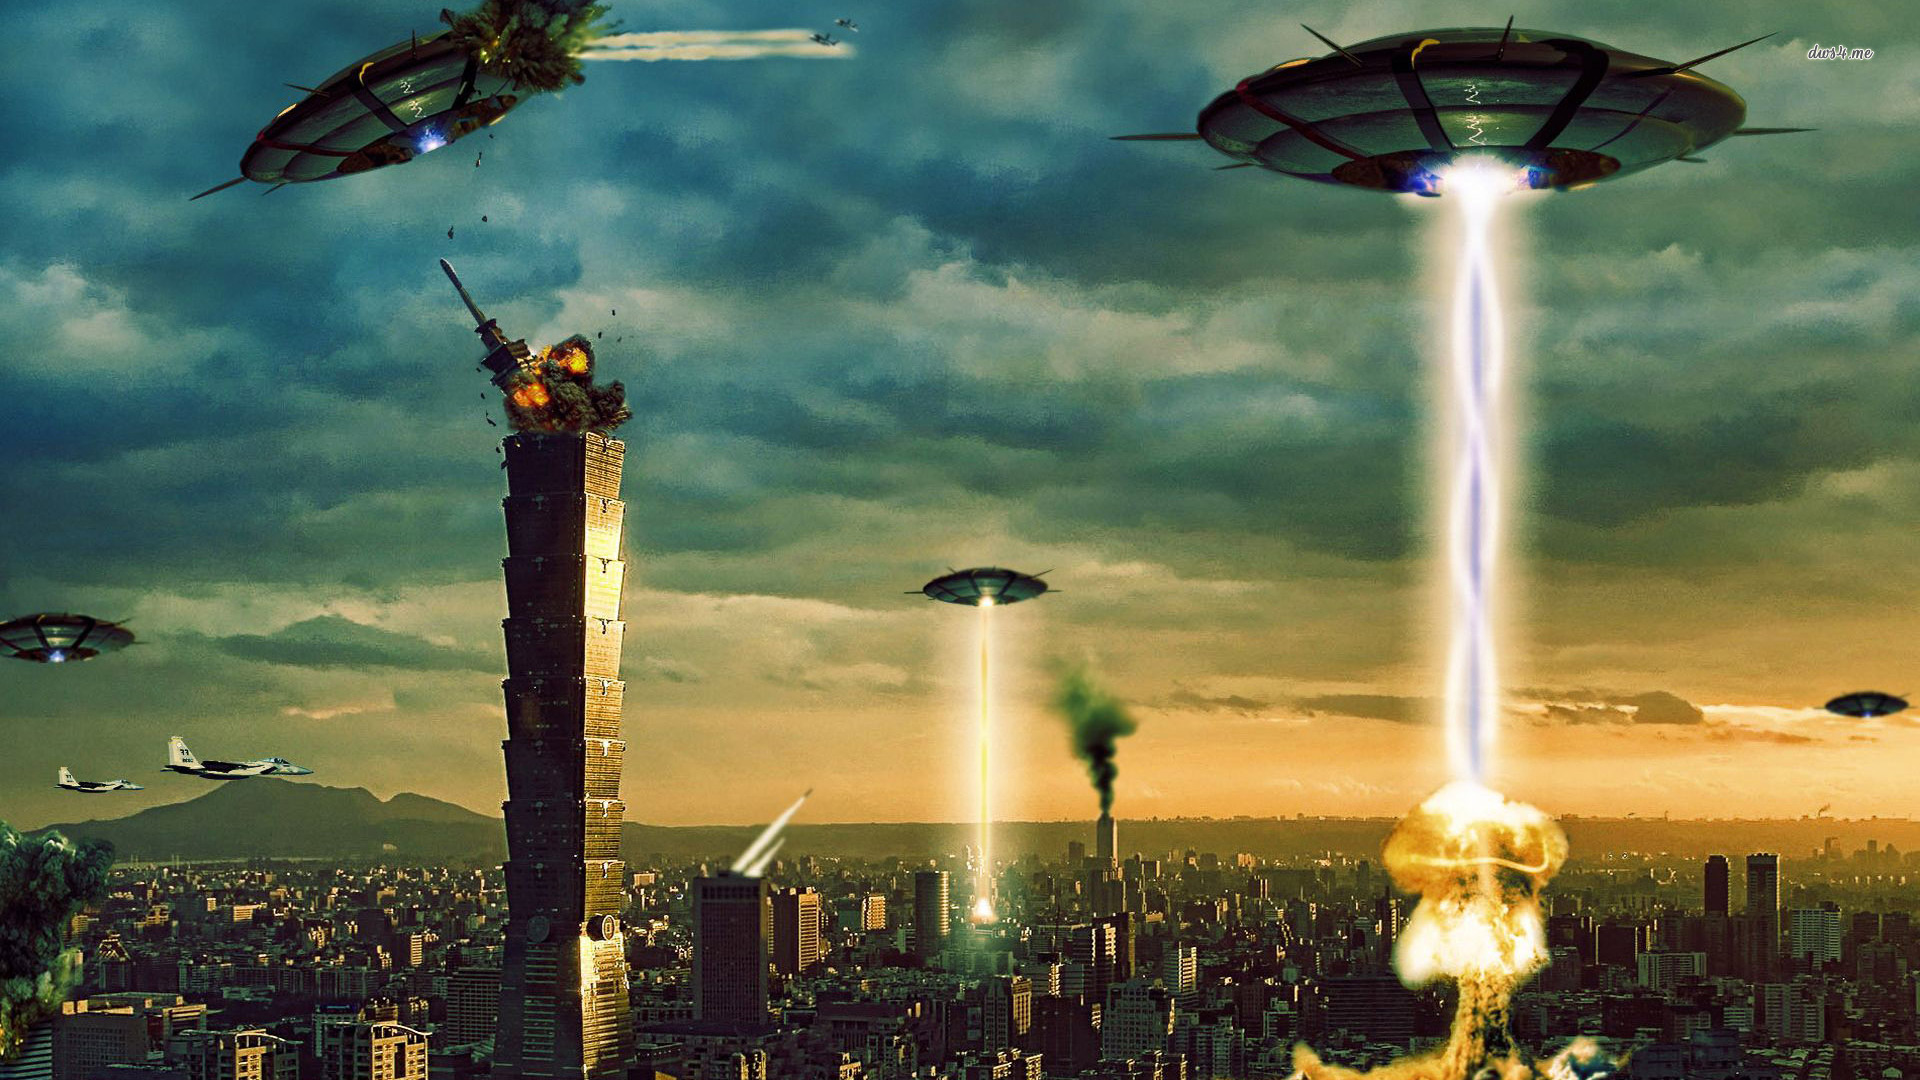 Aliens Use Nationwide EAS Test To Launch Attack